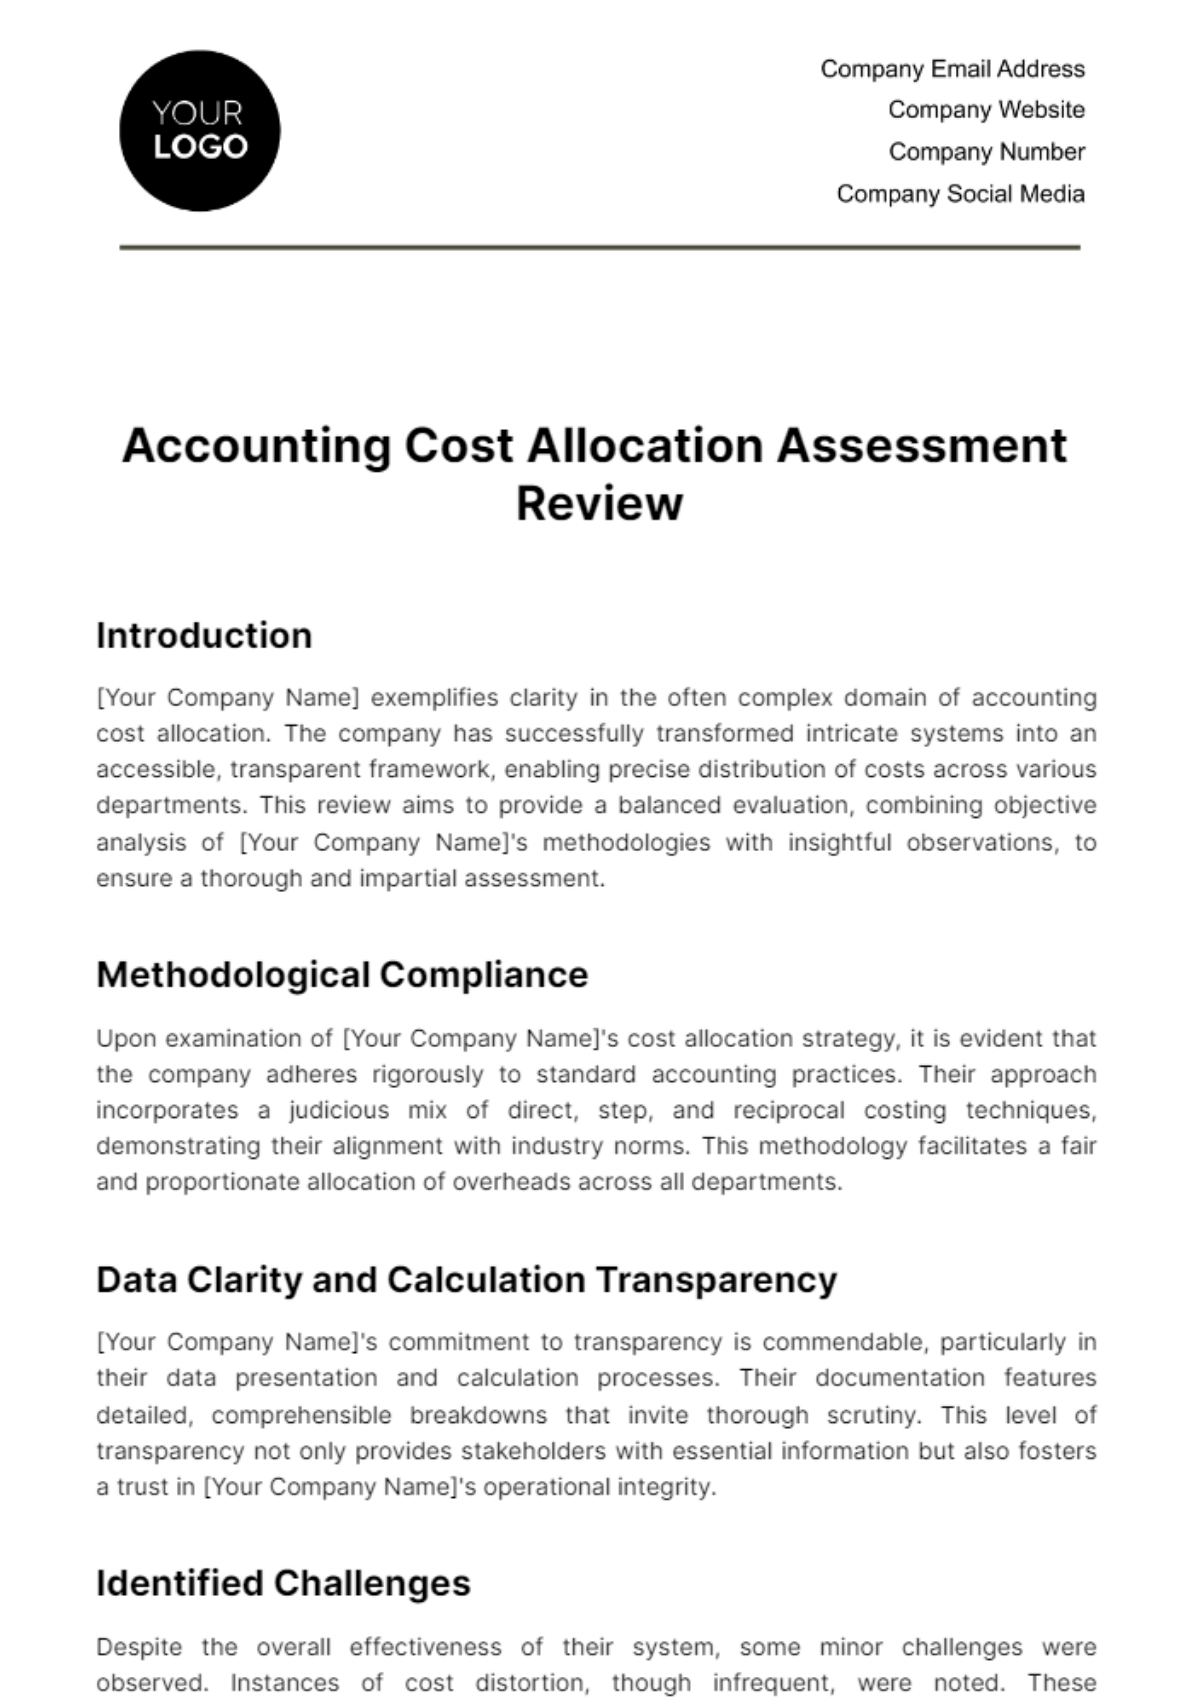 Accounting Cost Allocation Assessment Review Template